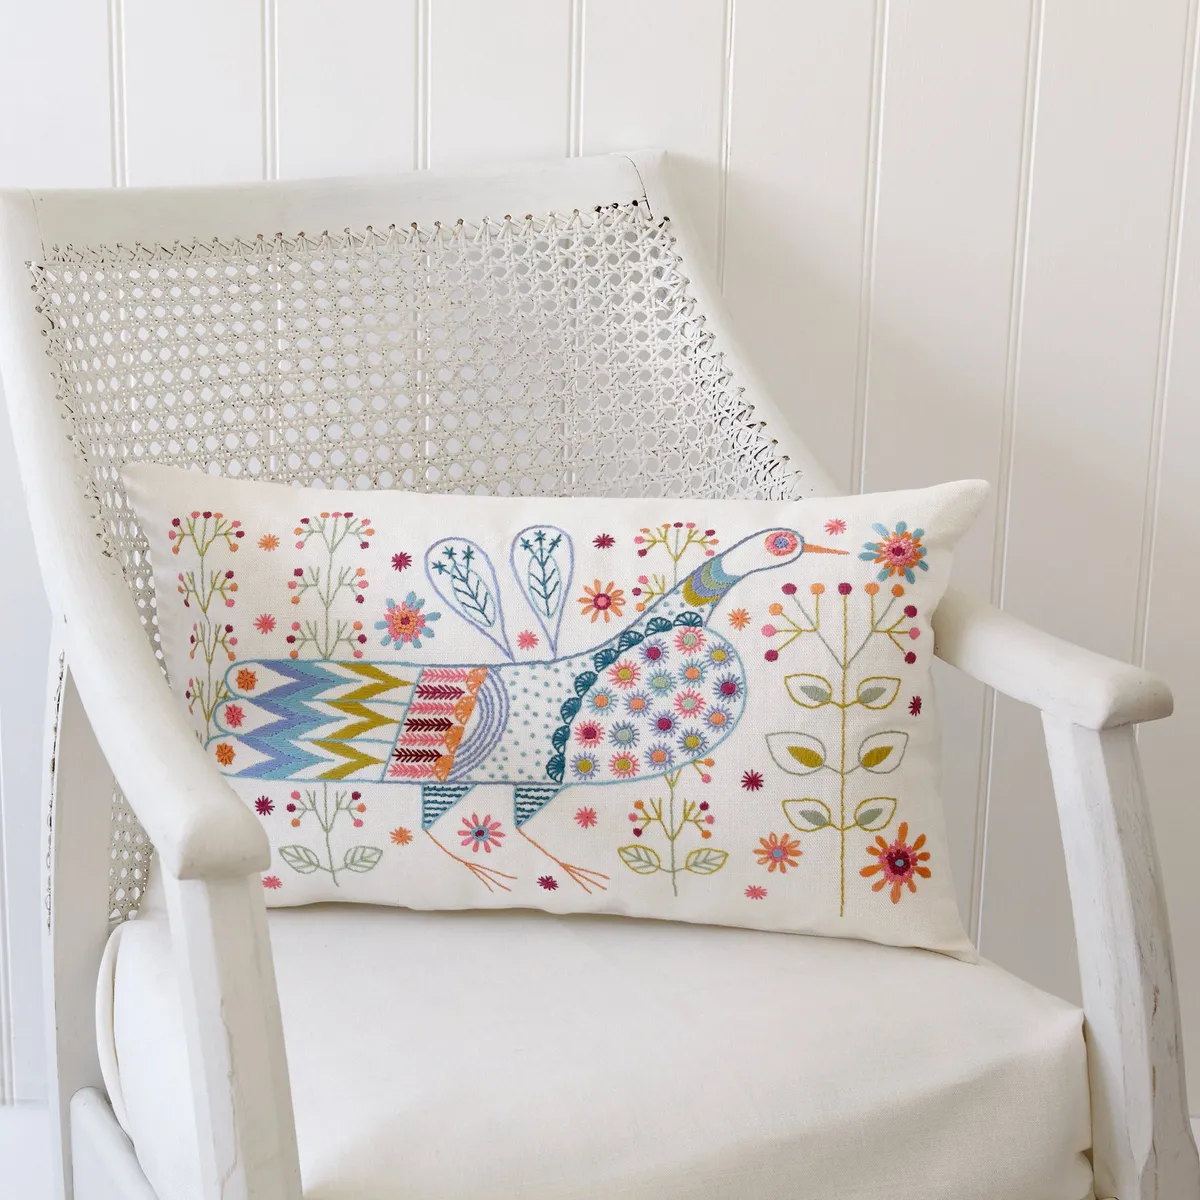 embroidered cushion kit with bird pattern